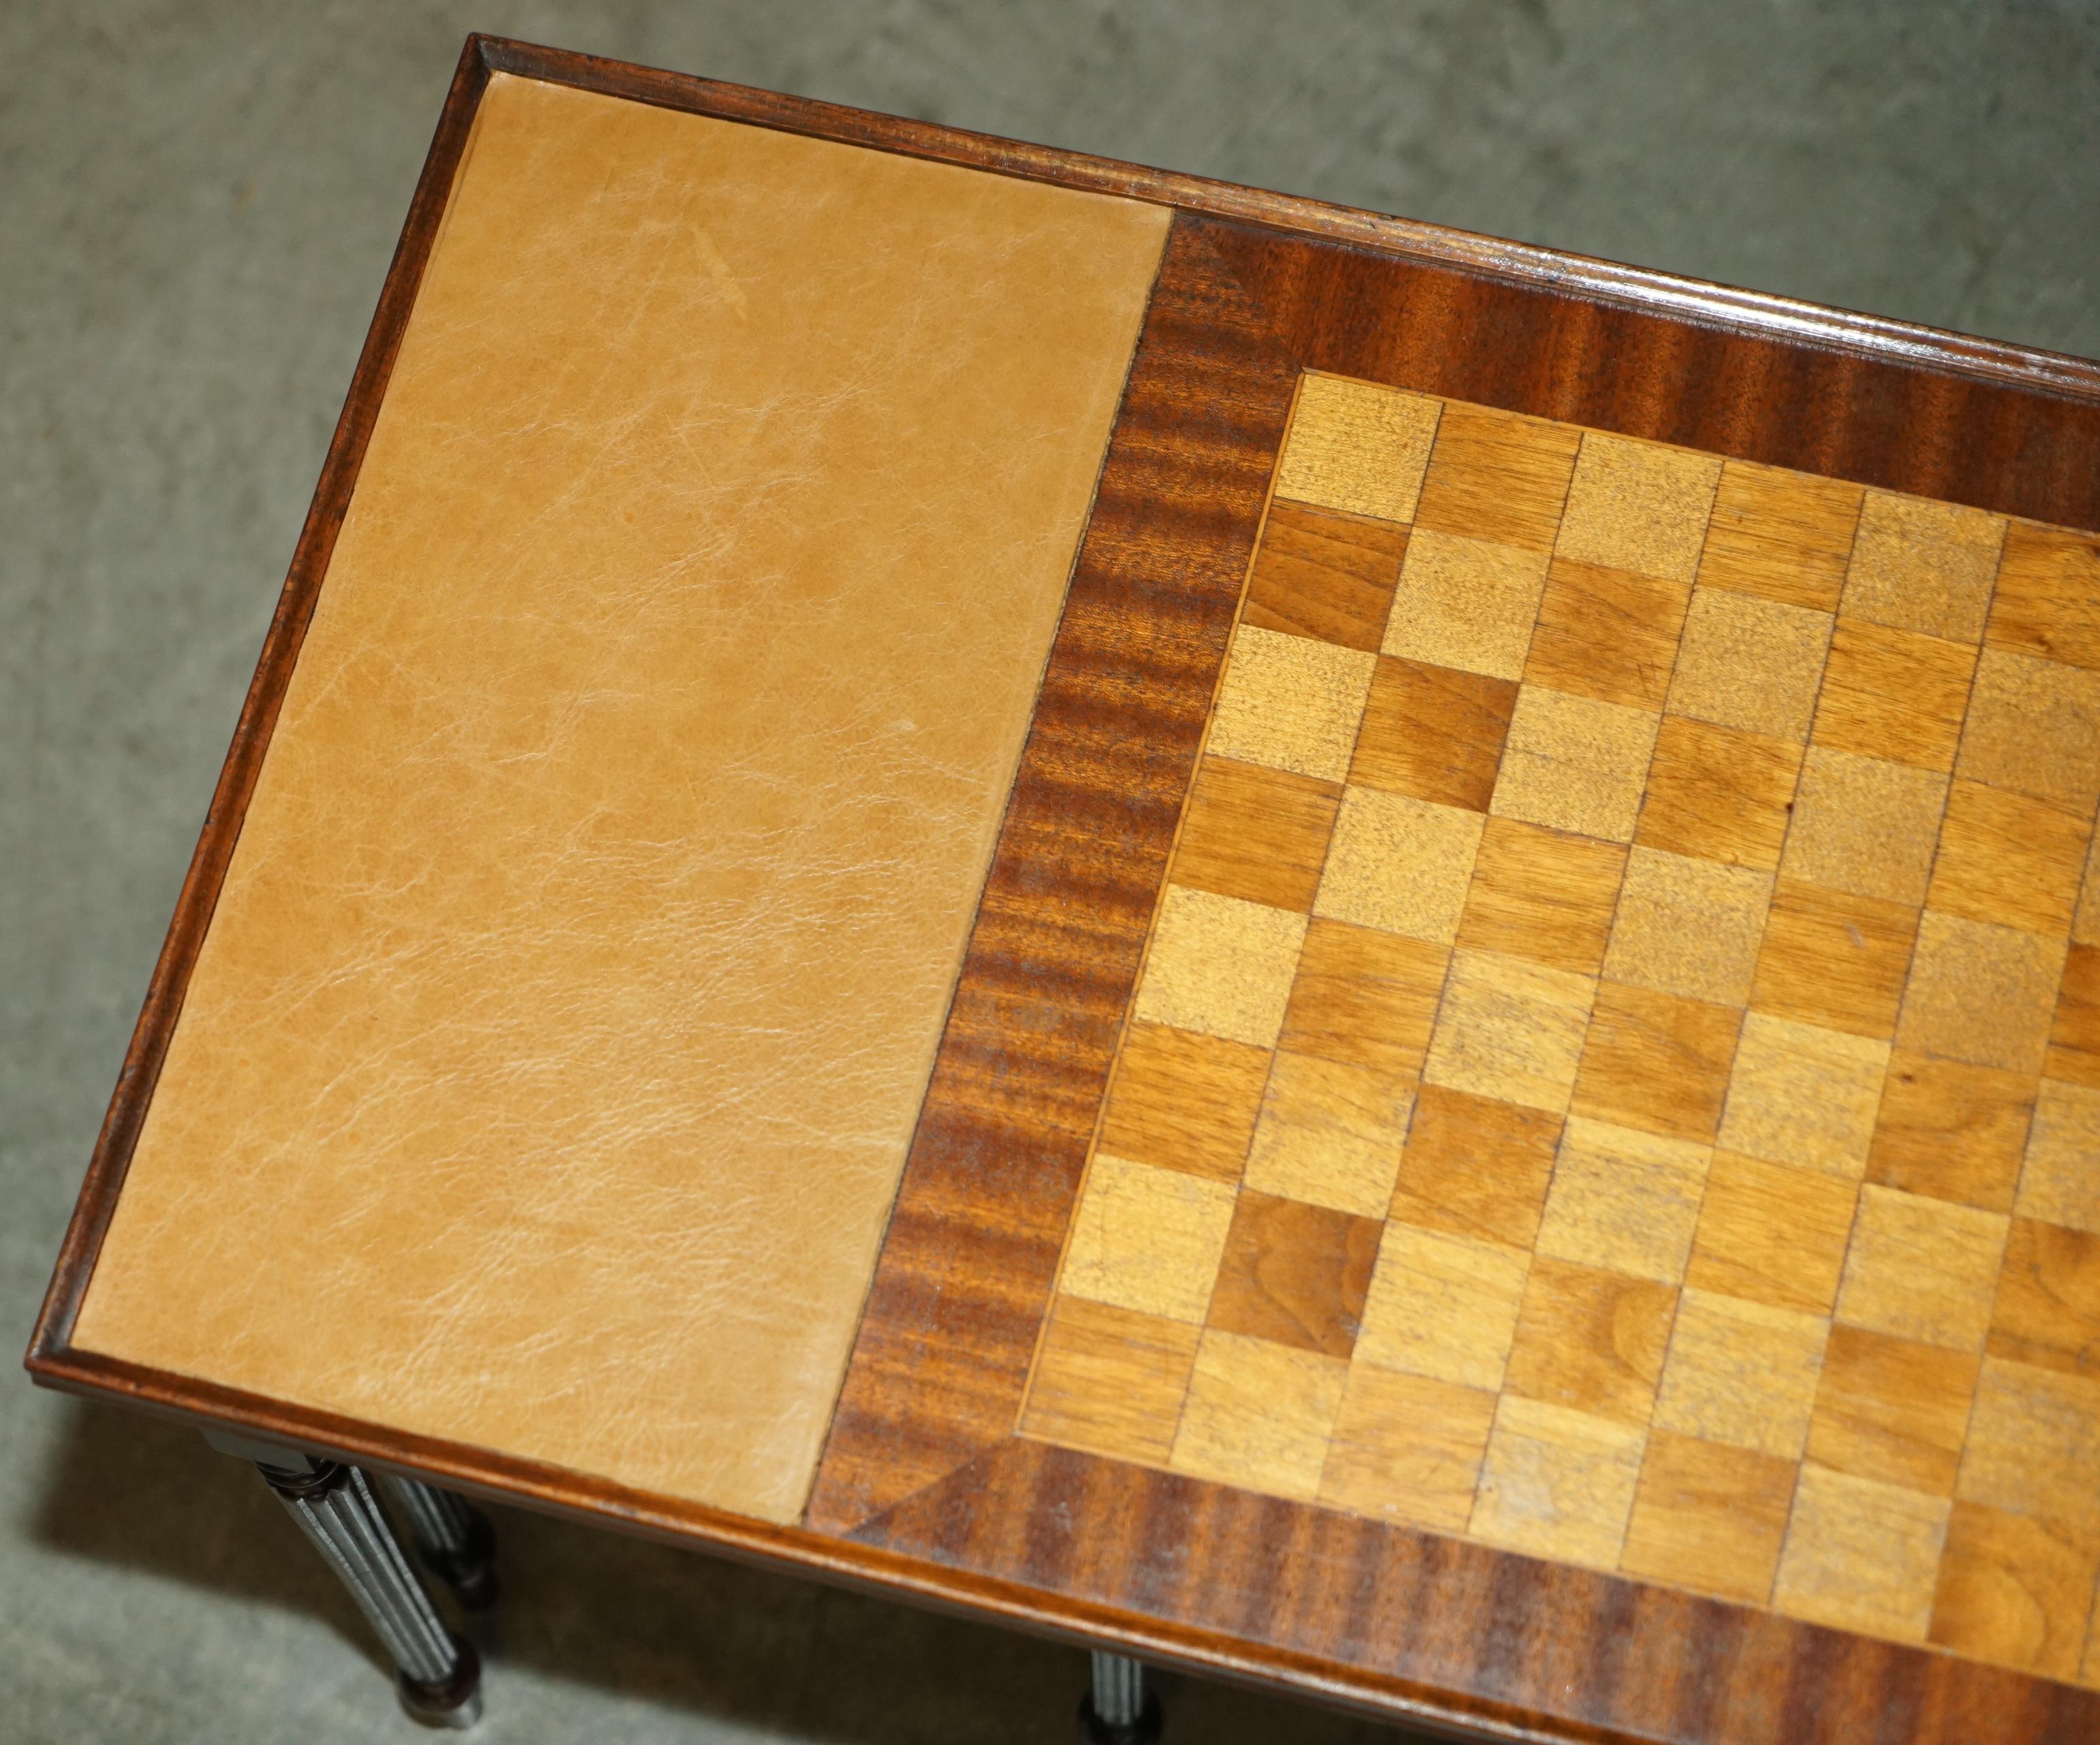 Mid-20th Century VINTAGE CIRCA 1950's LEATHER TOPPED CHESSBOARD COFFEE NEST OF TABLES FOR CHESS! For Sale